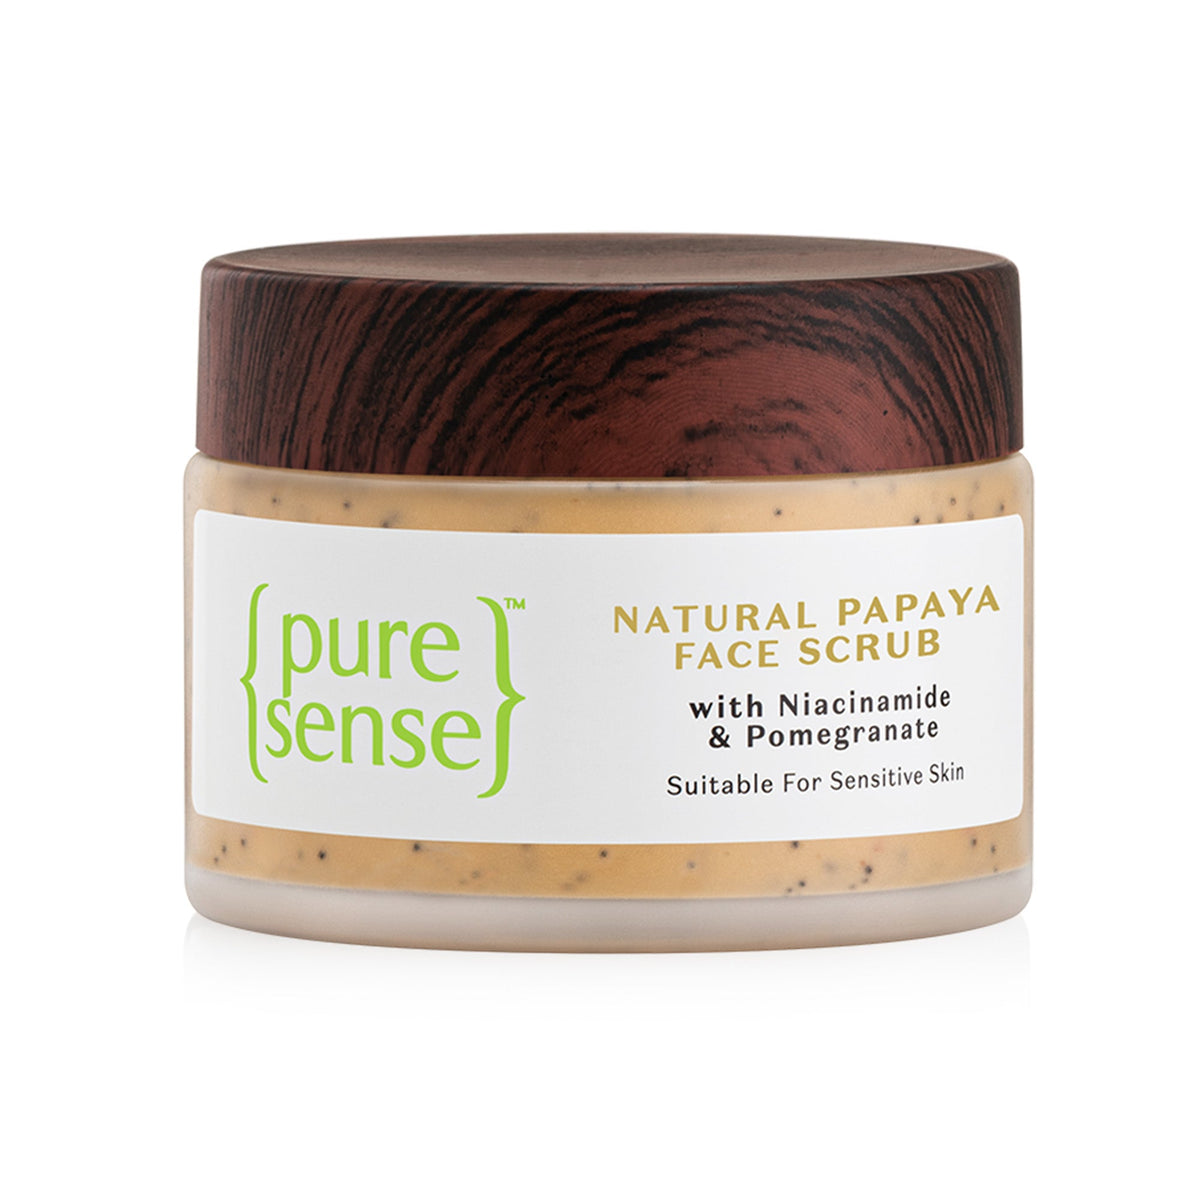 [CRED] Natural Papaya Face Scrub | Paraben & Sulphate Free | From the makers of Parachute Advansed | 50g